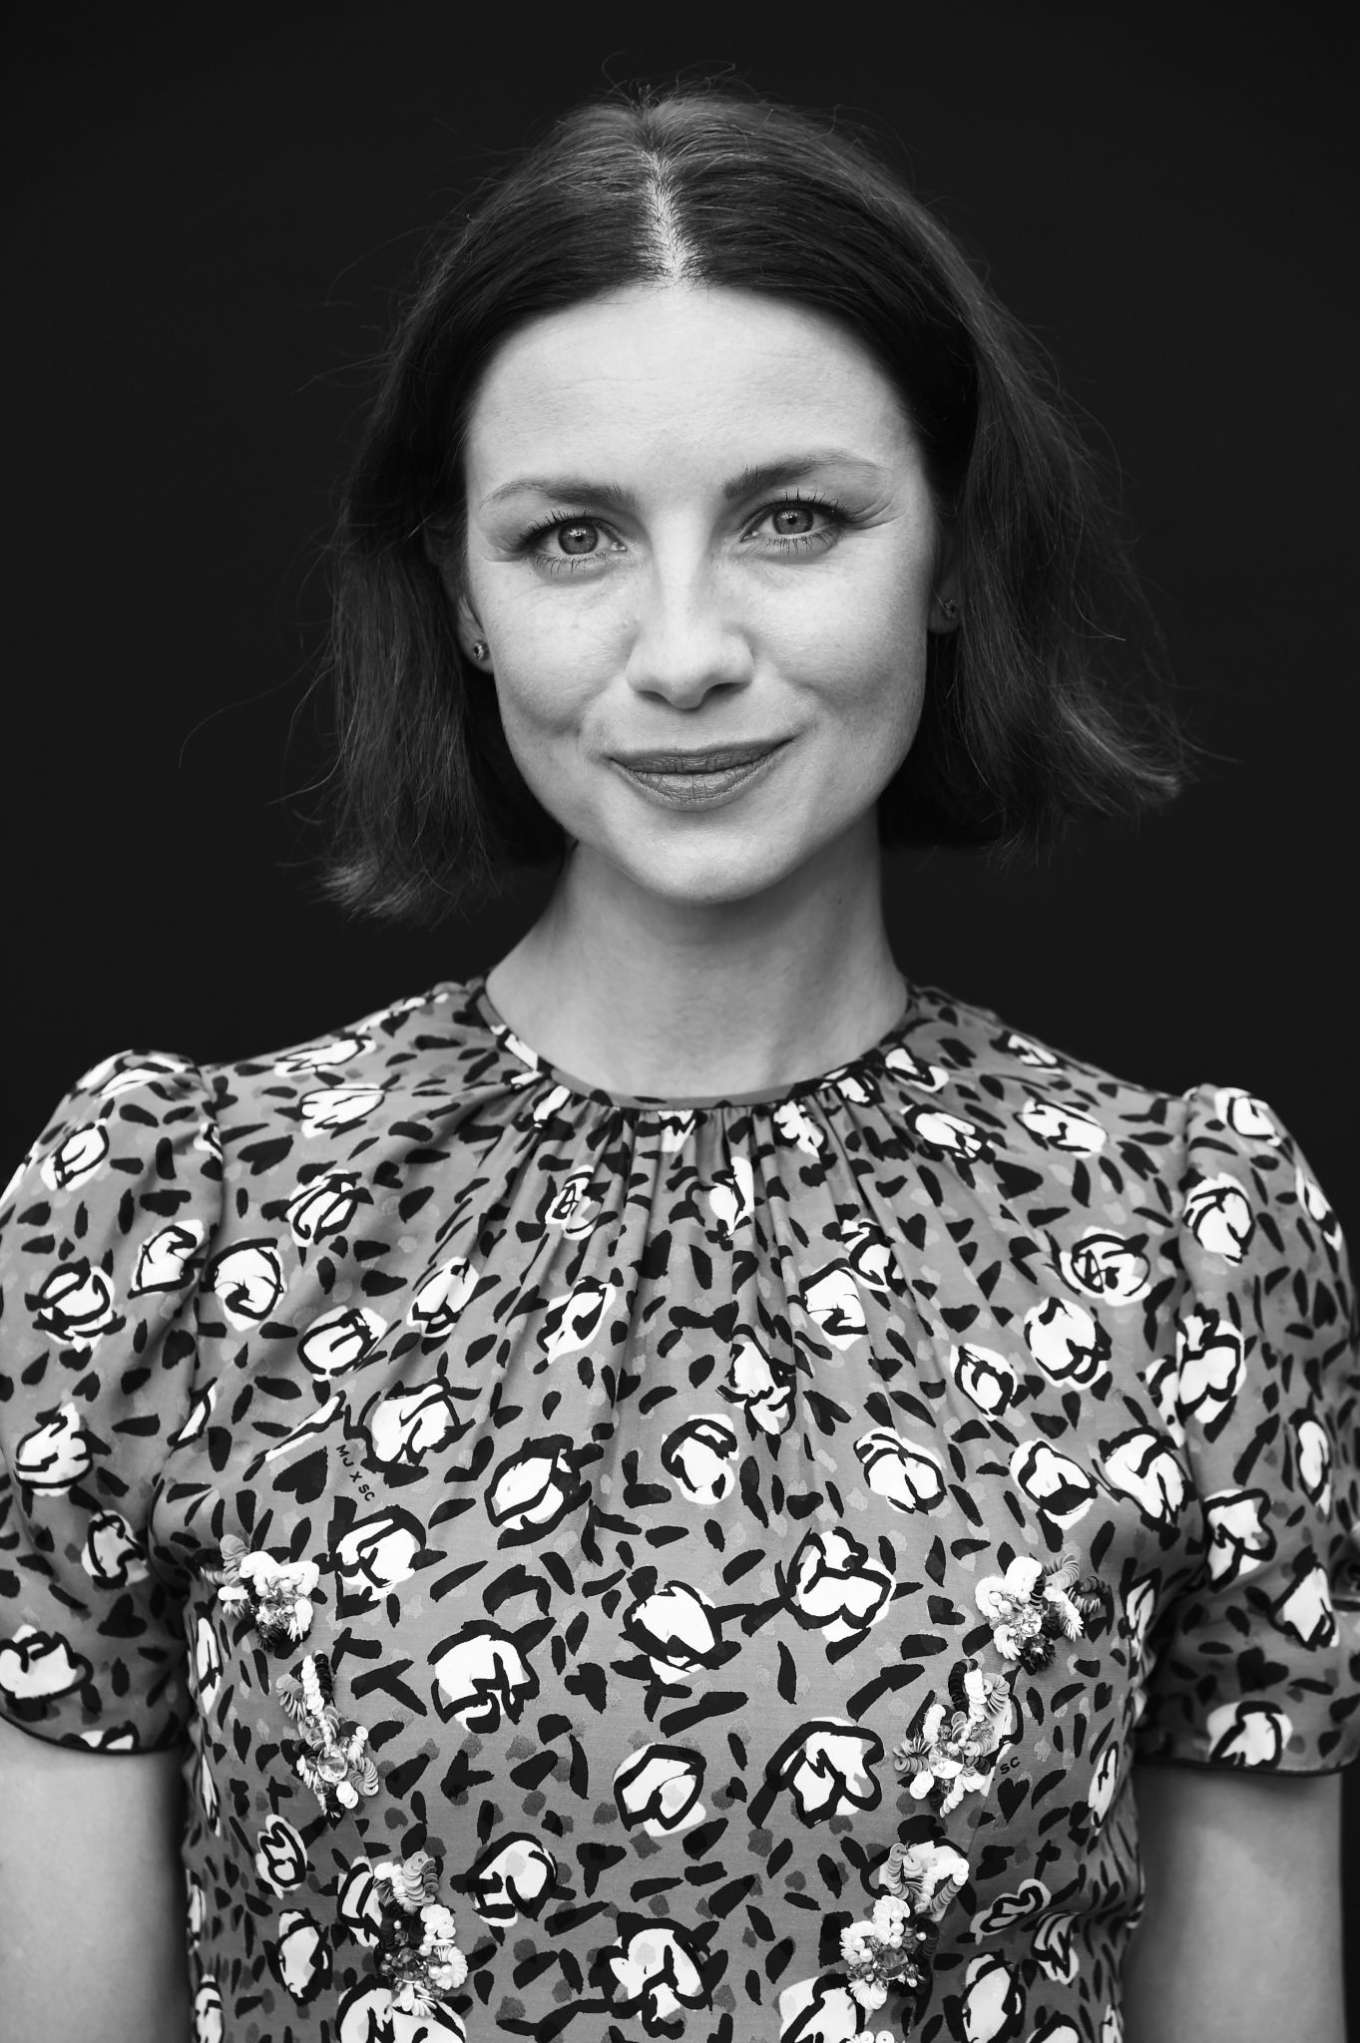 Caitriona Balfe â€“ Where Creativity Culture and Conversations Collide at Starz FYC 2019